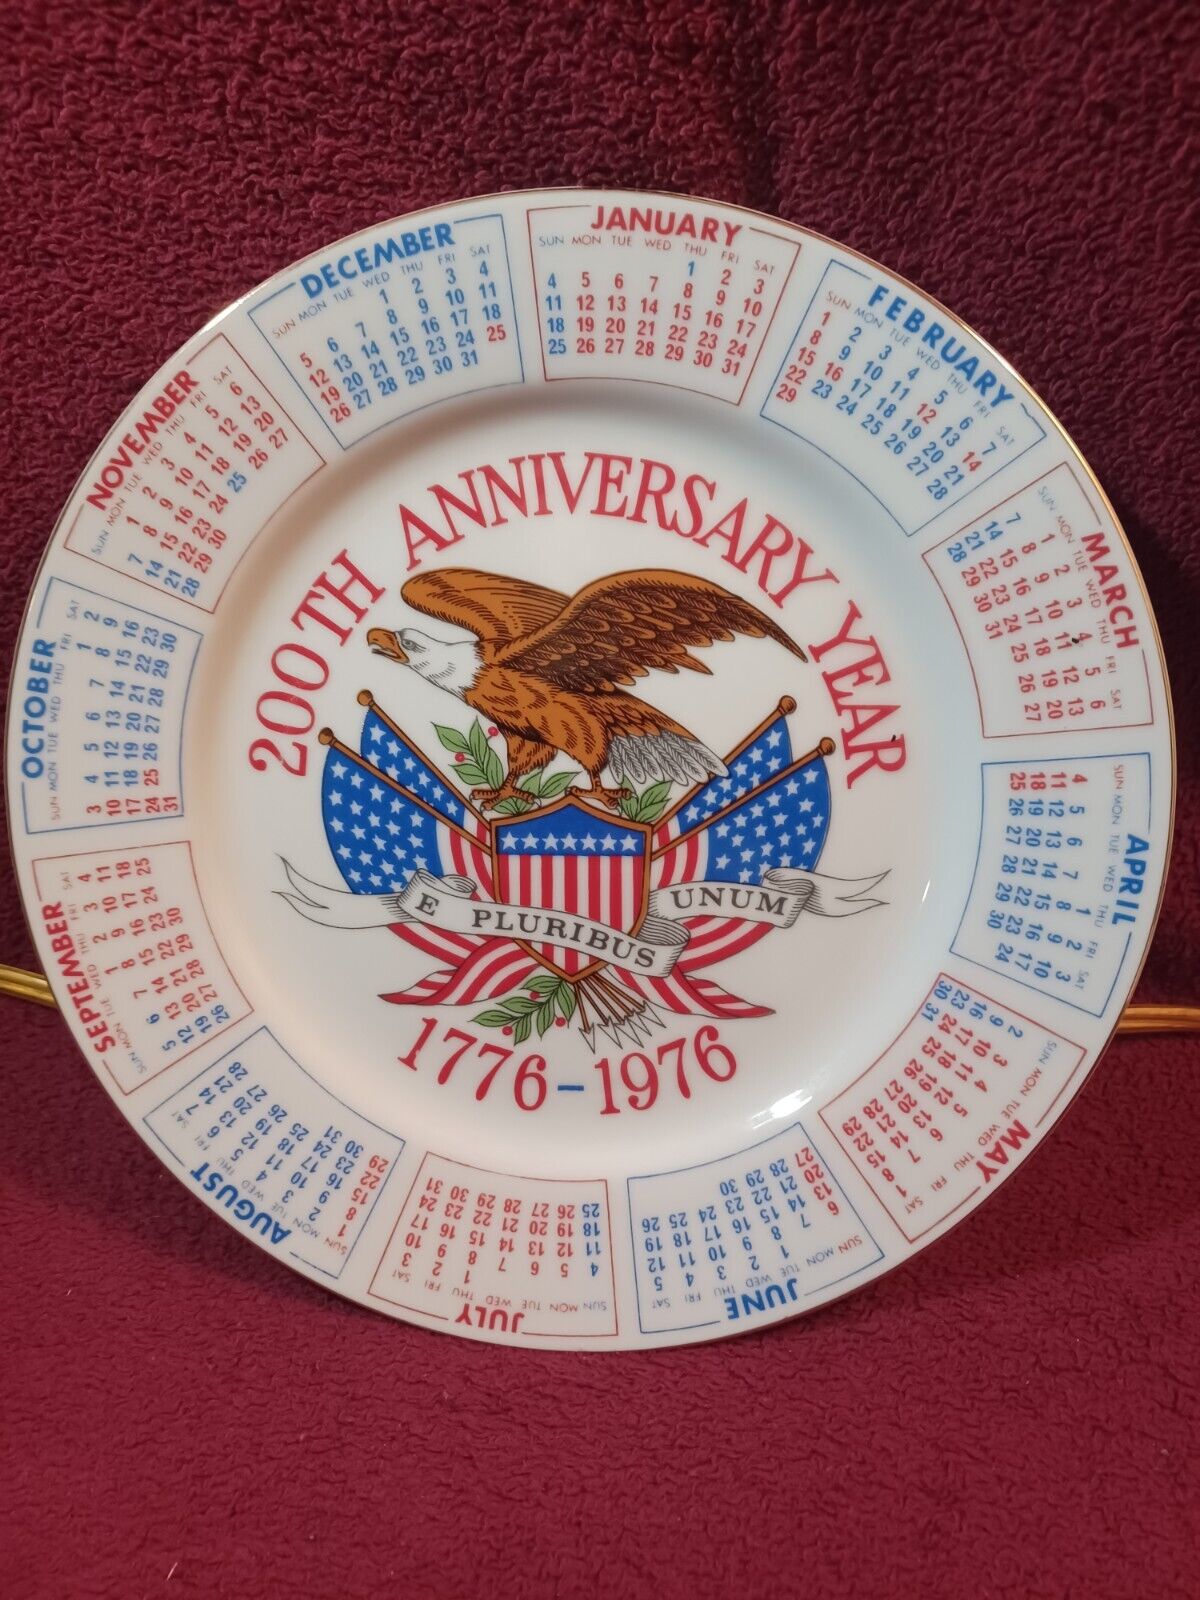 Vintage 200th Anniversary Collector Calendar Plate 1776-1976 by Spencer Gifts